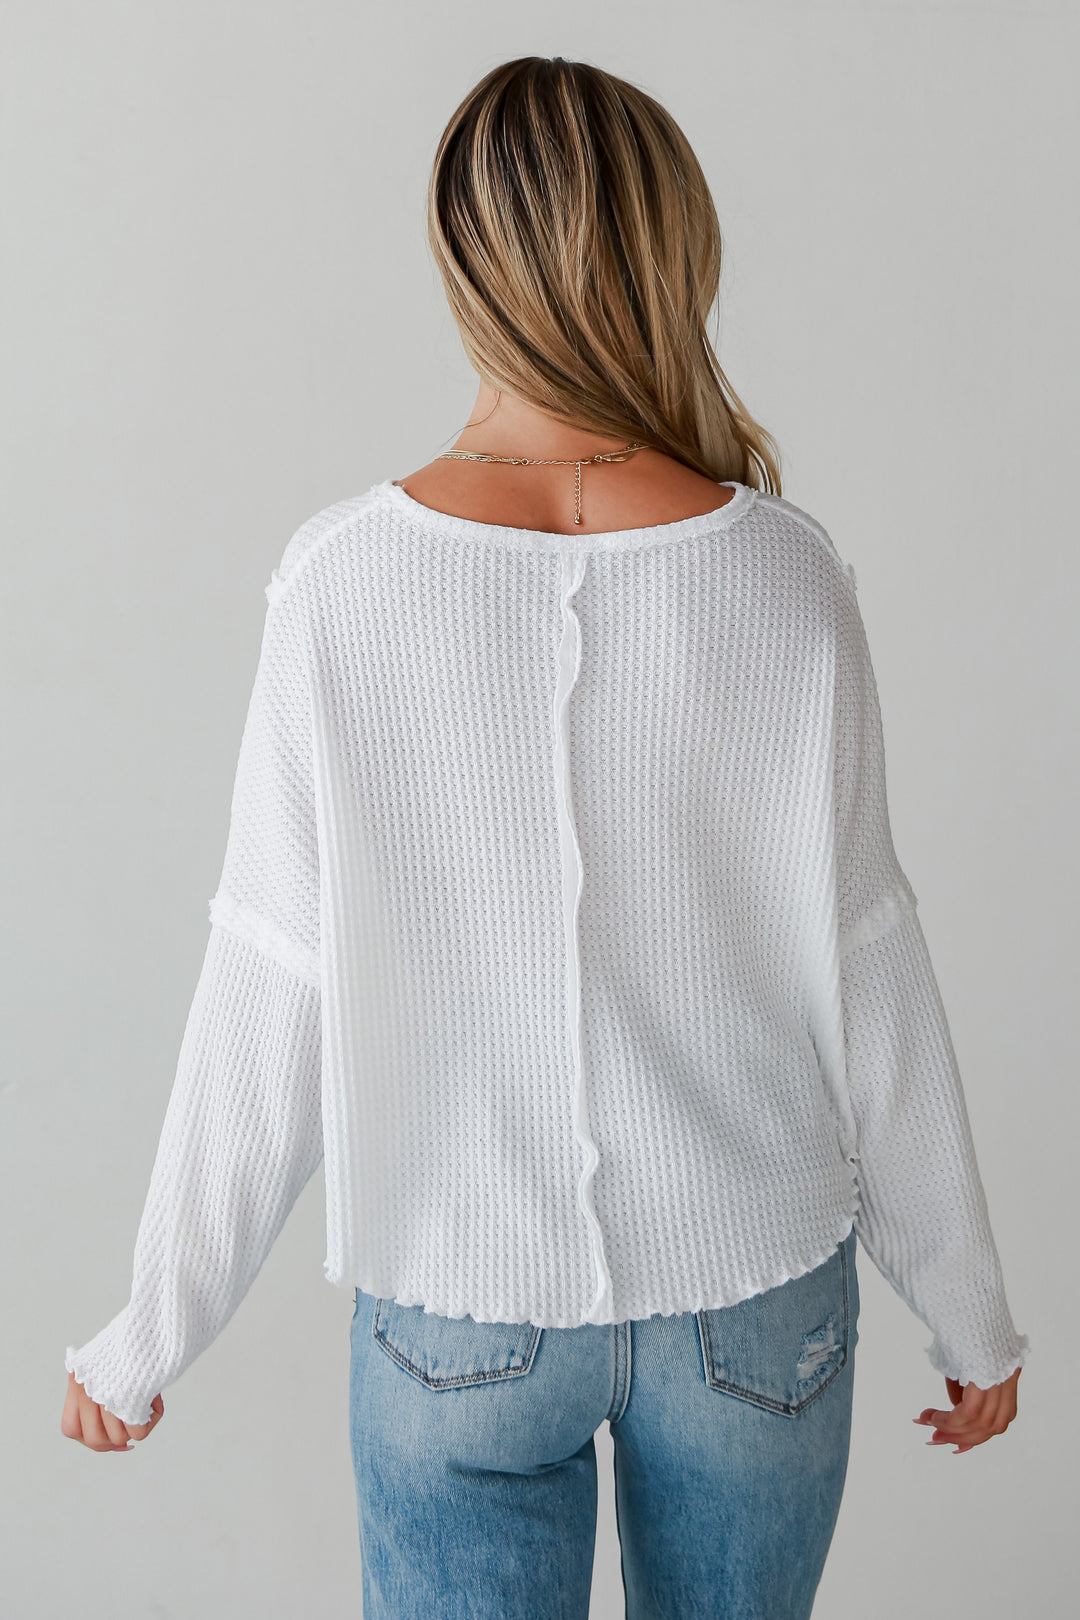 White Waffle Knit Top back view